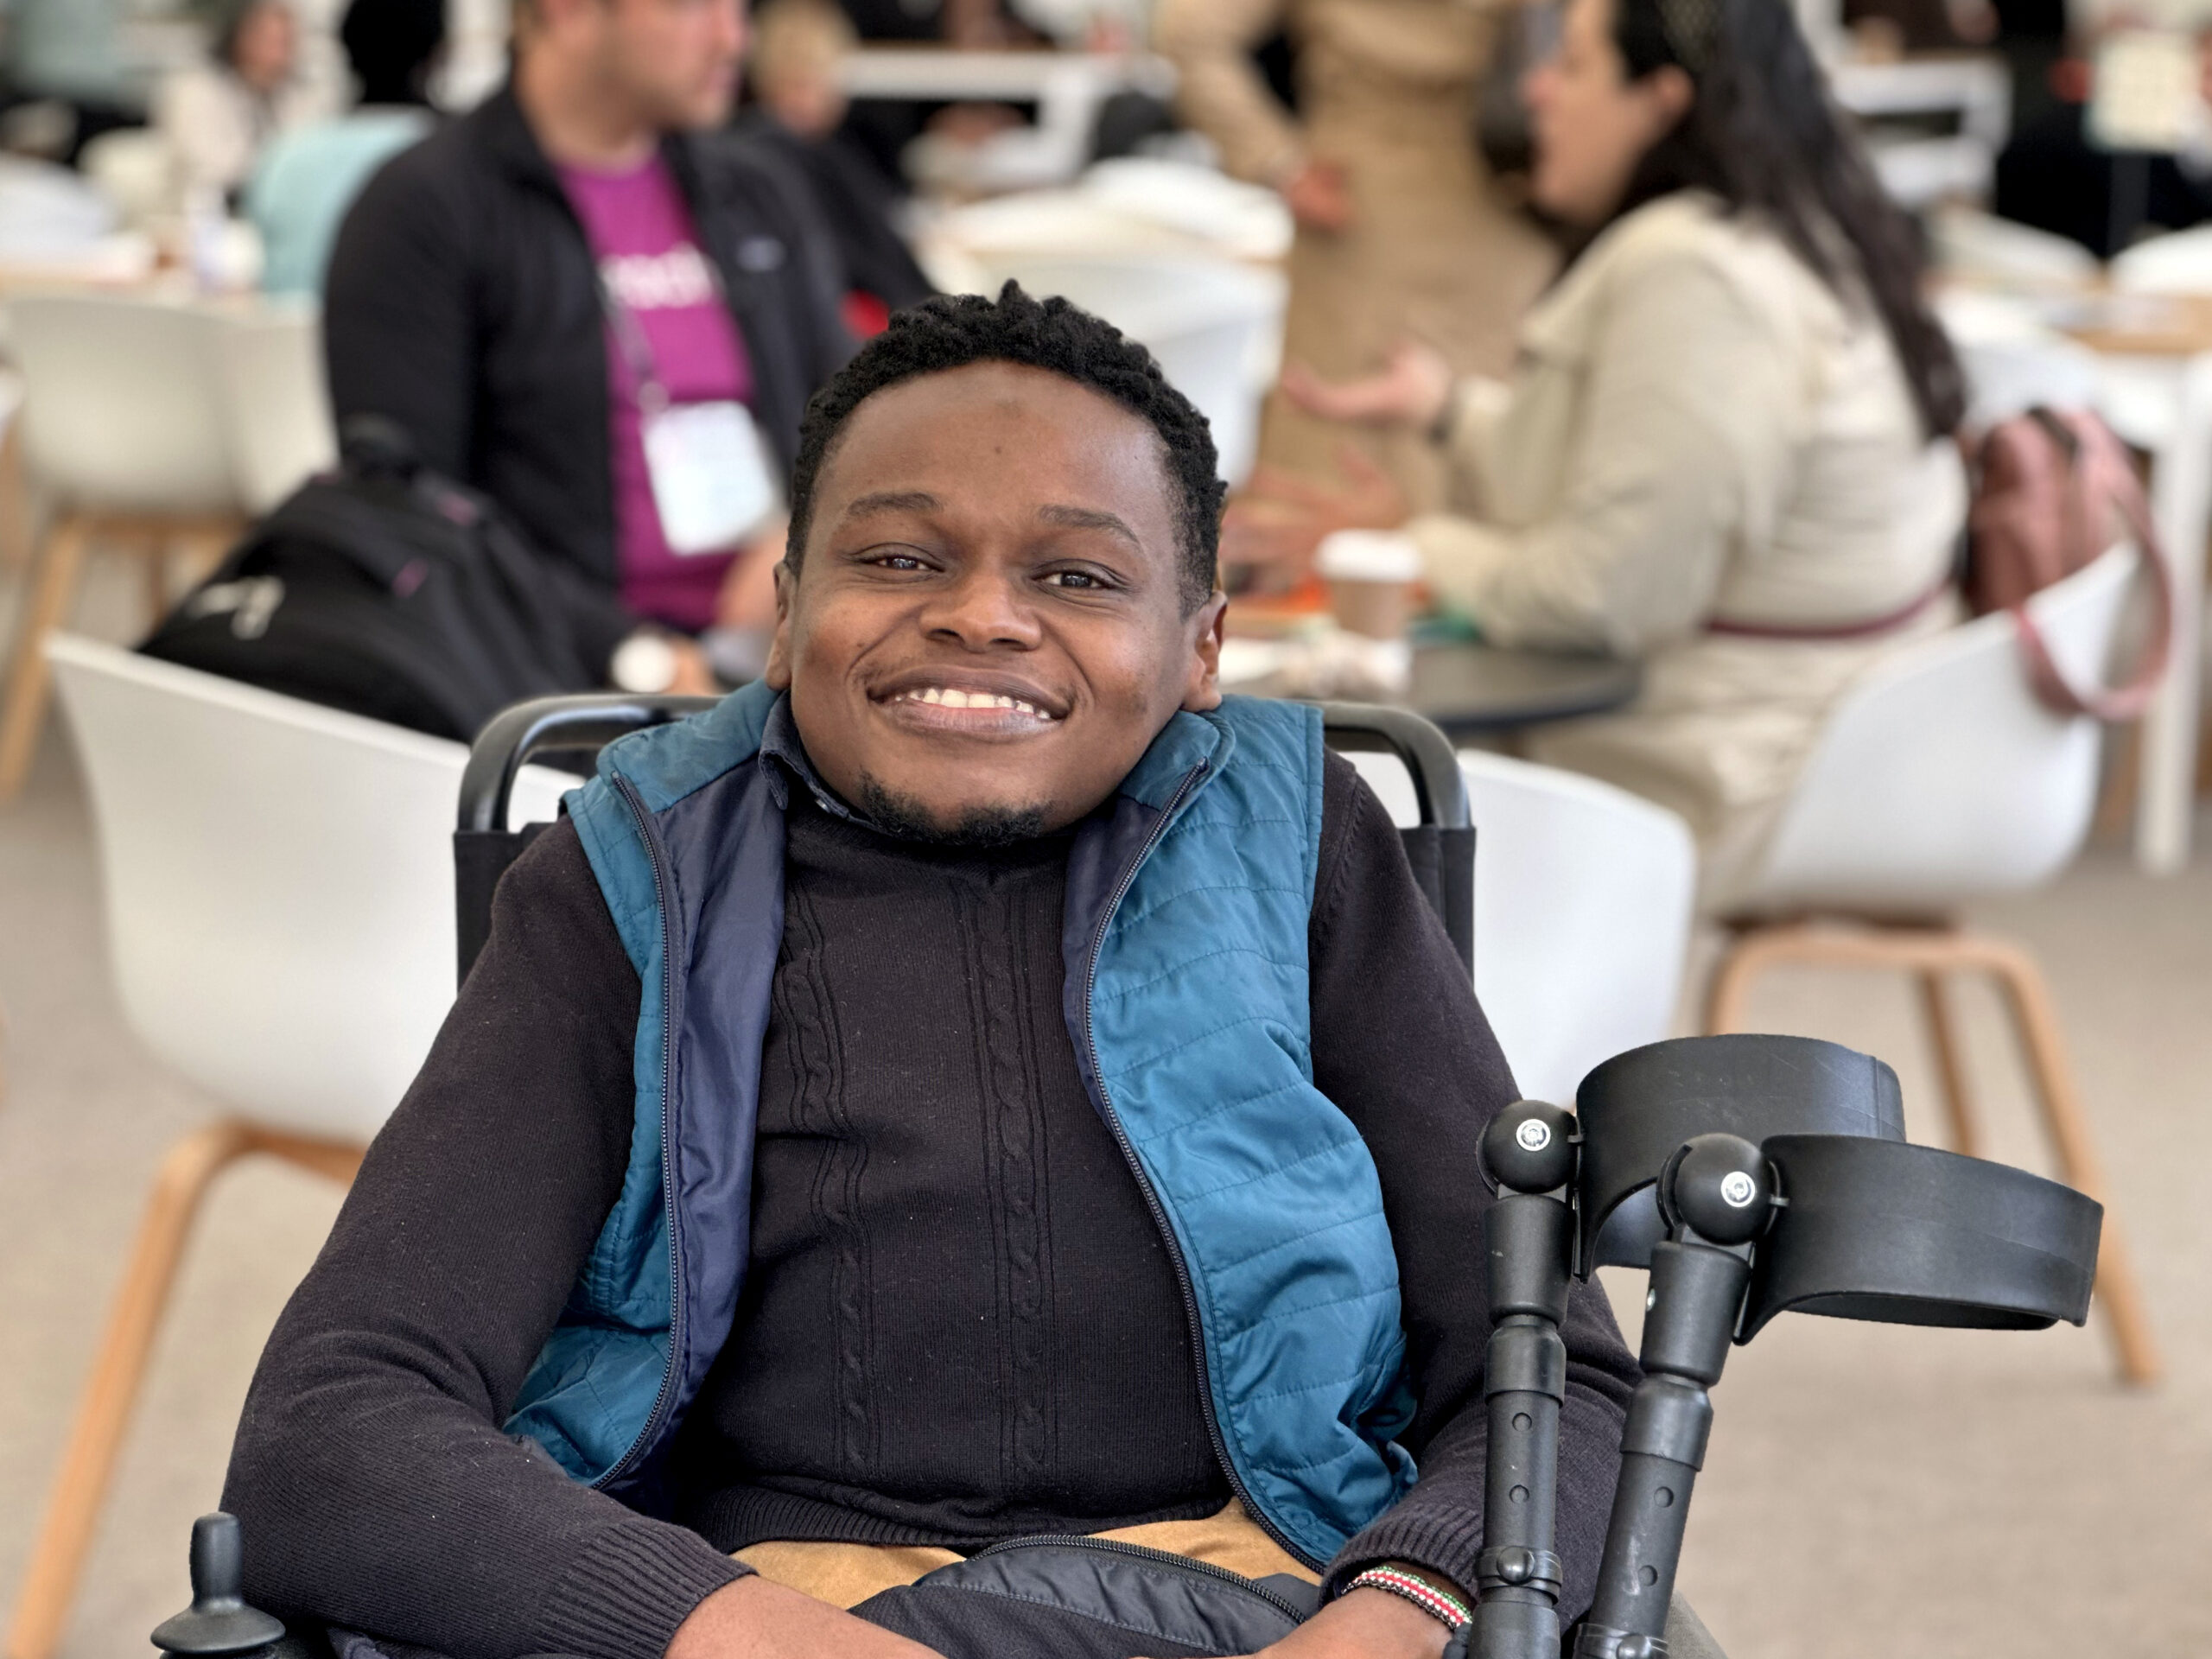 Bernard Chiira founded the Assistive Technologies for Disability Trust or AT4D. It is an accelerator that has supported 45 startups from 11 countries. Many of the startups aim to help people with disabilities access the technologies they need – including wheelchairs.